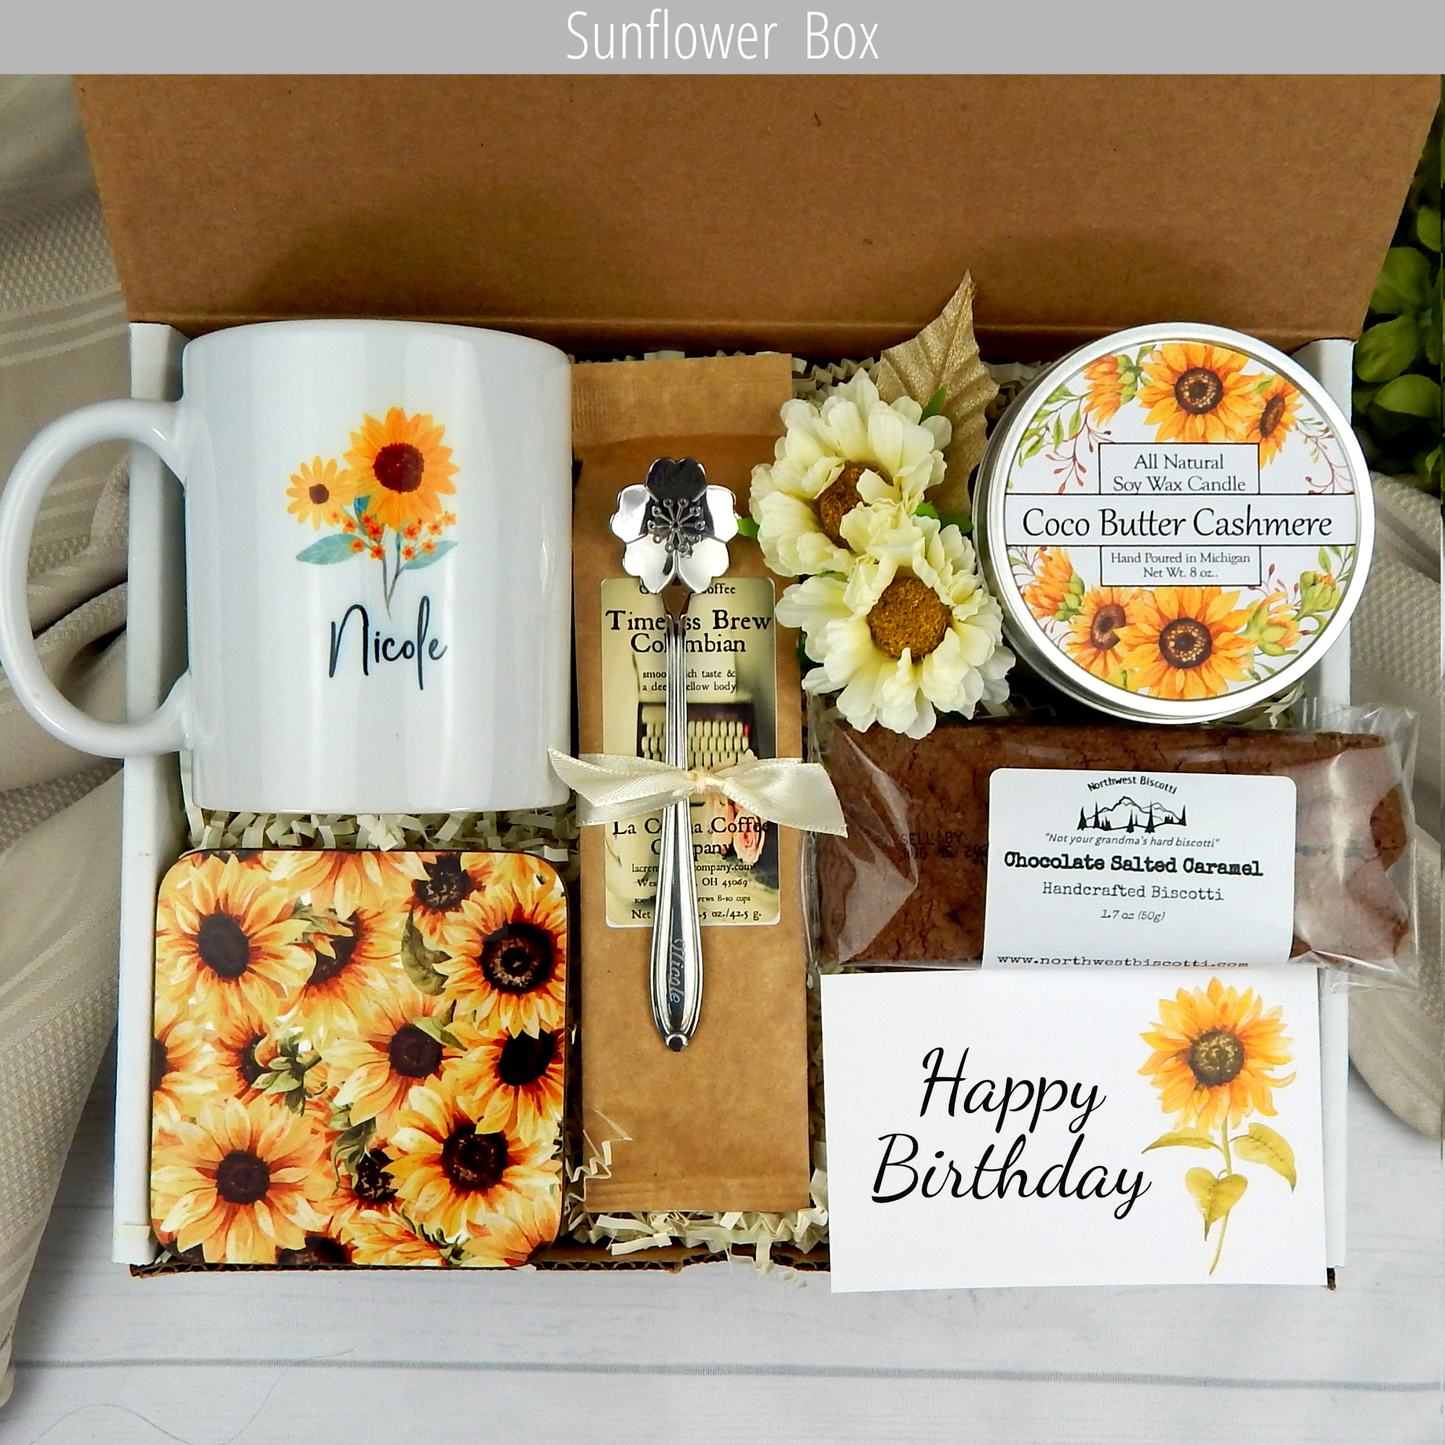 Sunflower themed birthday Women's care package featuring a personalized mug and coffee